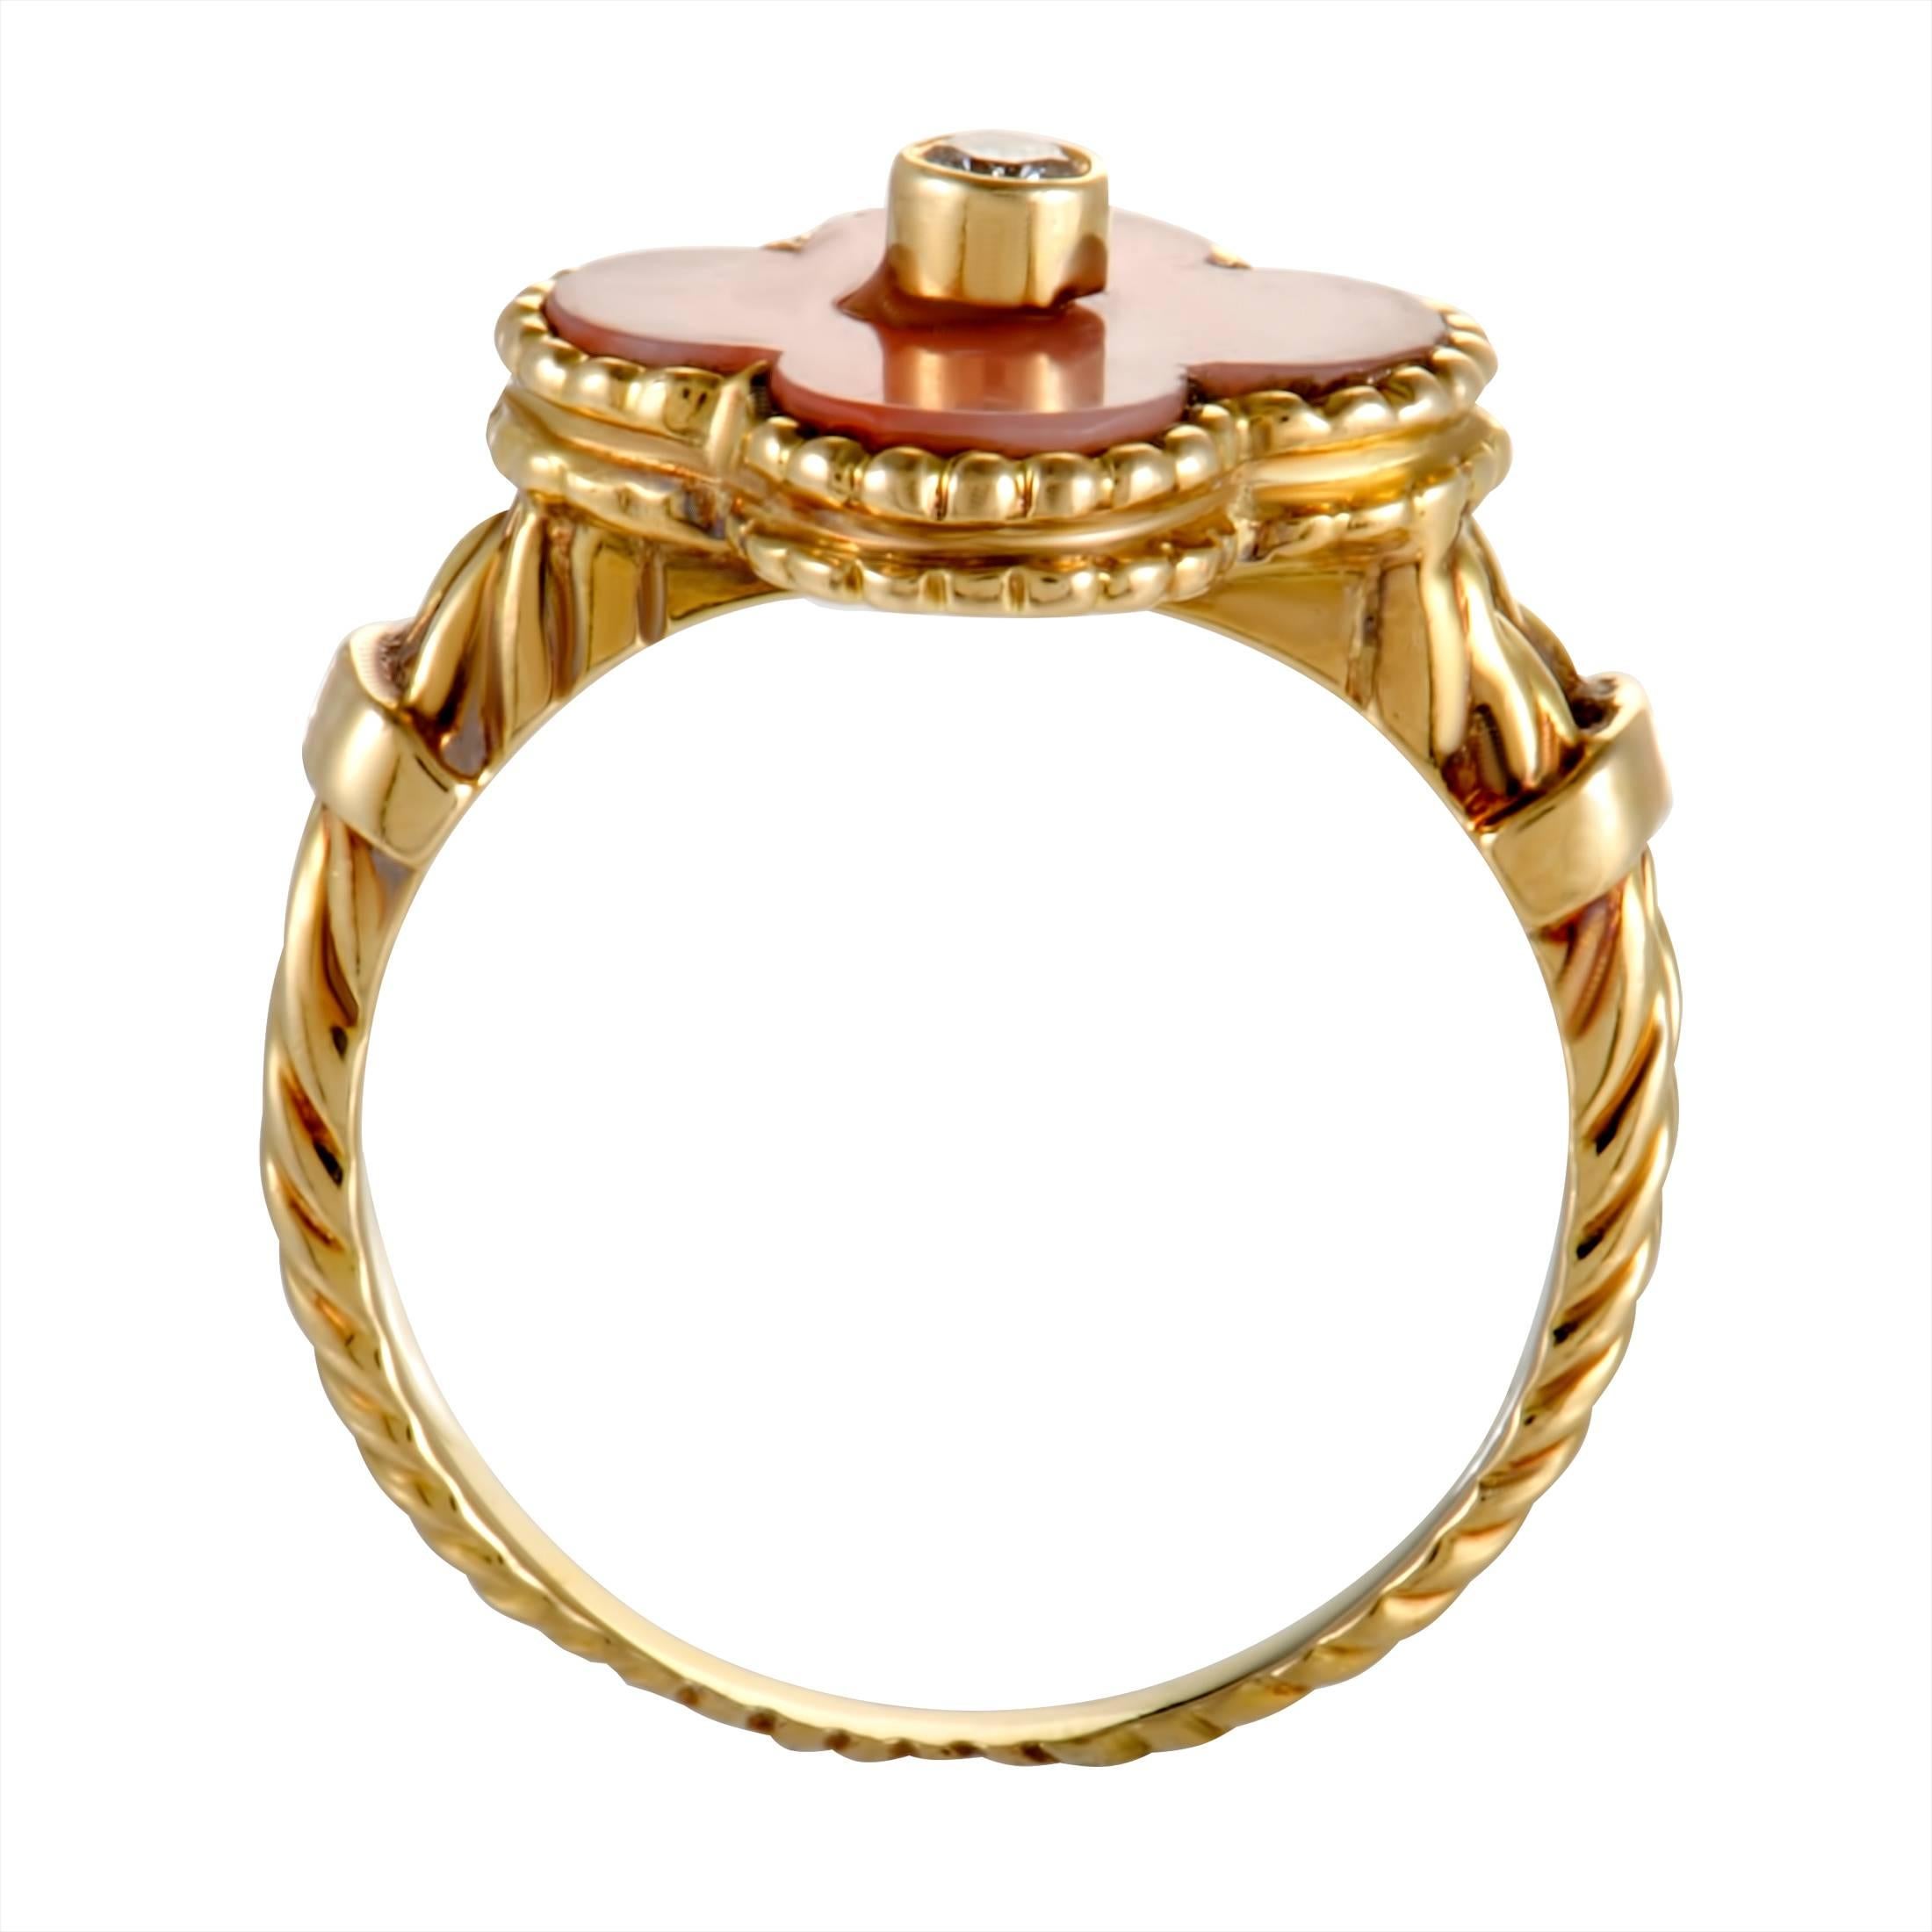 Beautifully designed in 18K yellow gold, this extravagant ring by Van Cleef & Arpels is simply gorgeous! Its splendid design has its iconic motif made of red coral and a twinkling diamond placed perfectly in the center that accentuates the complete